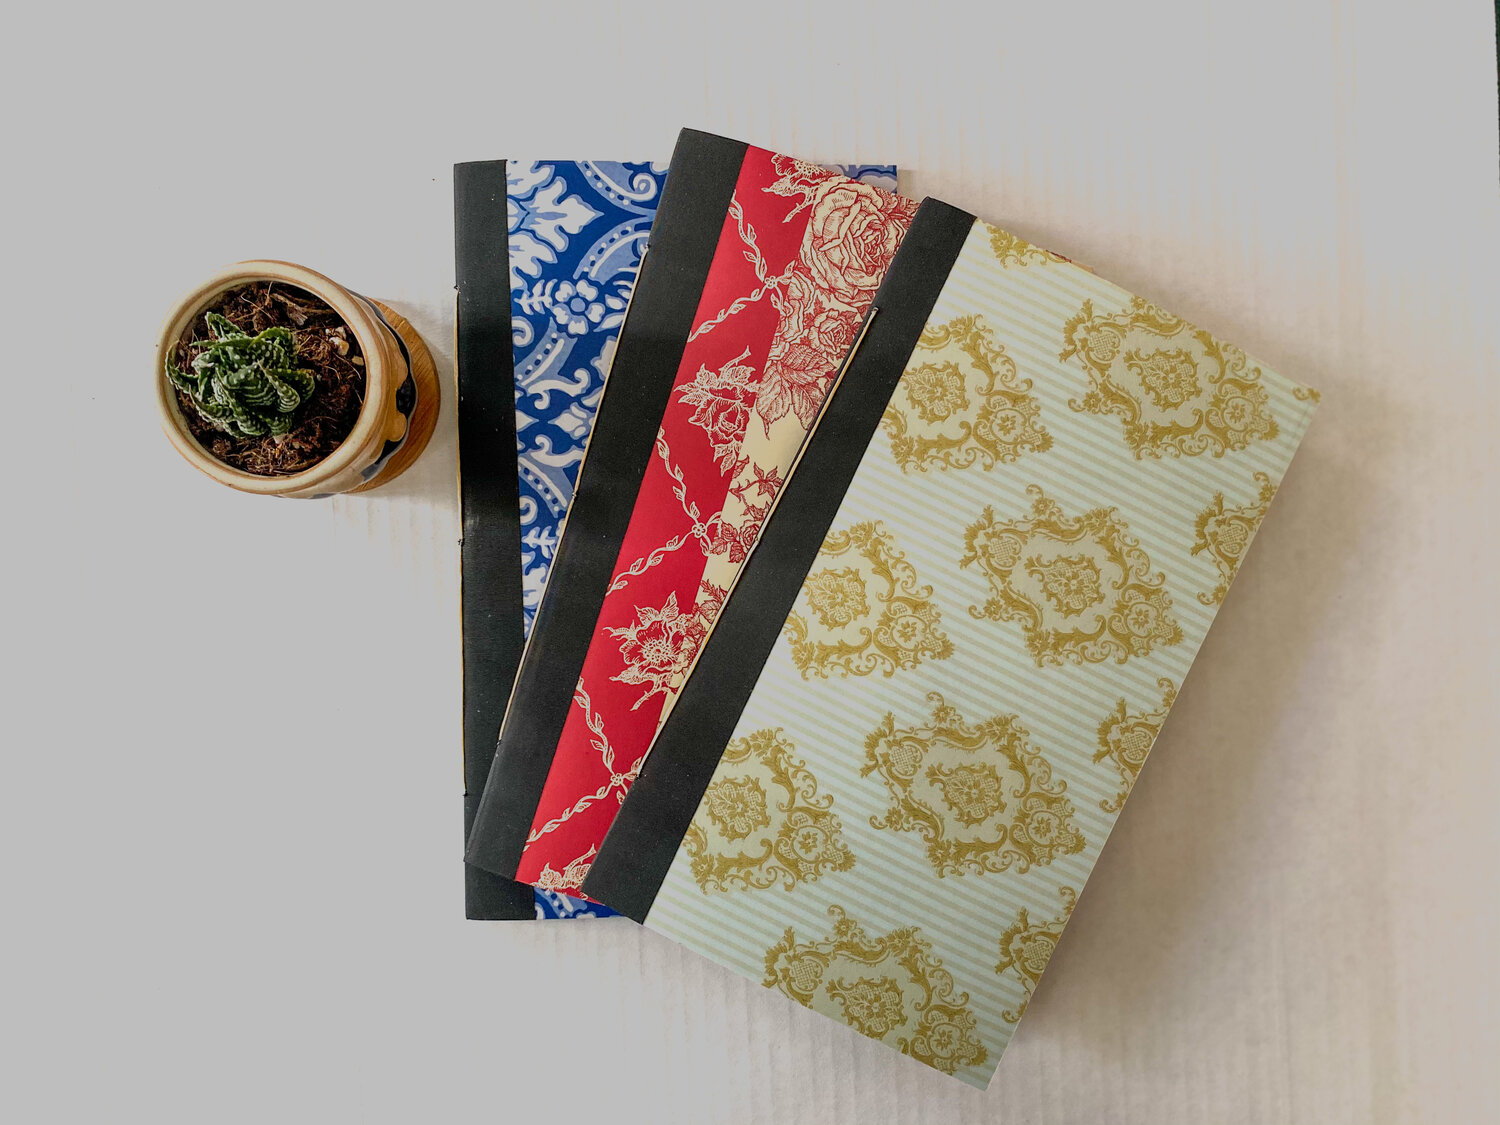 Bookmaking Kit + Webinar — The Chattery